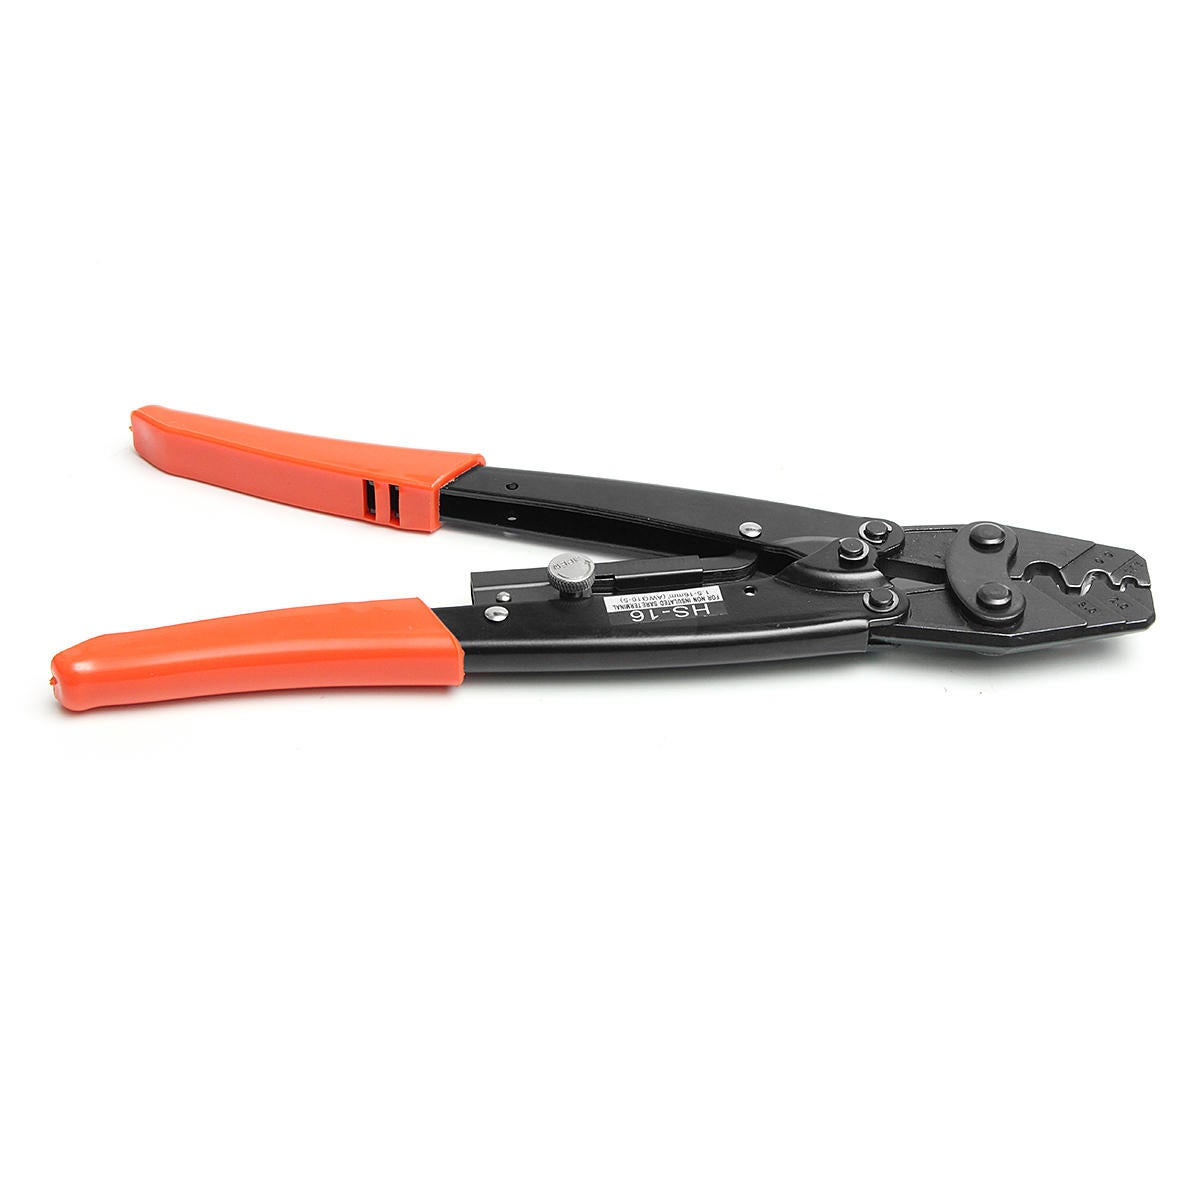 50 Amp 1.25-16 Mm2 Plug Cable Crimping Tool For Wire Crimper Terminals Links